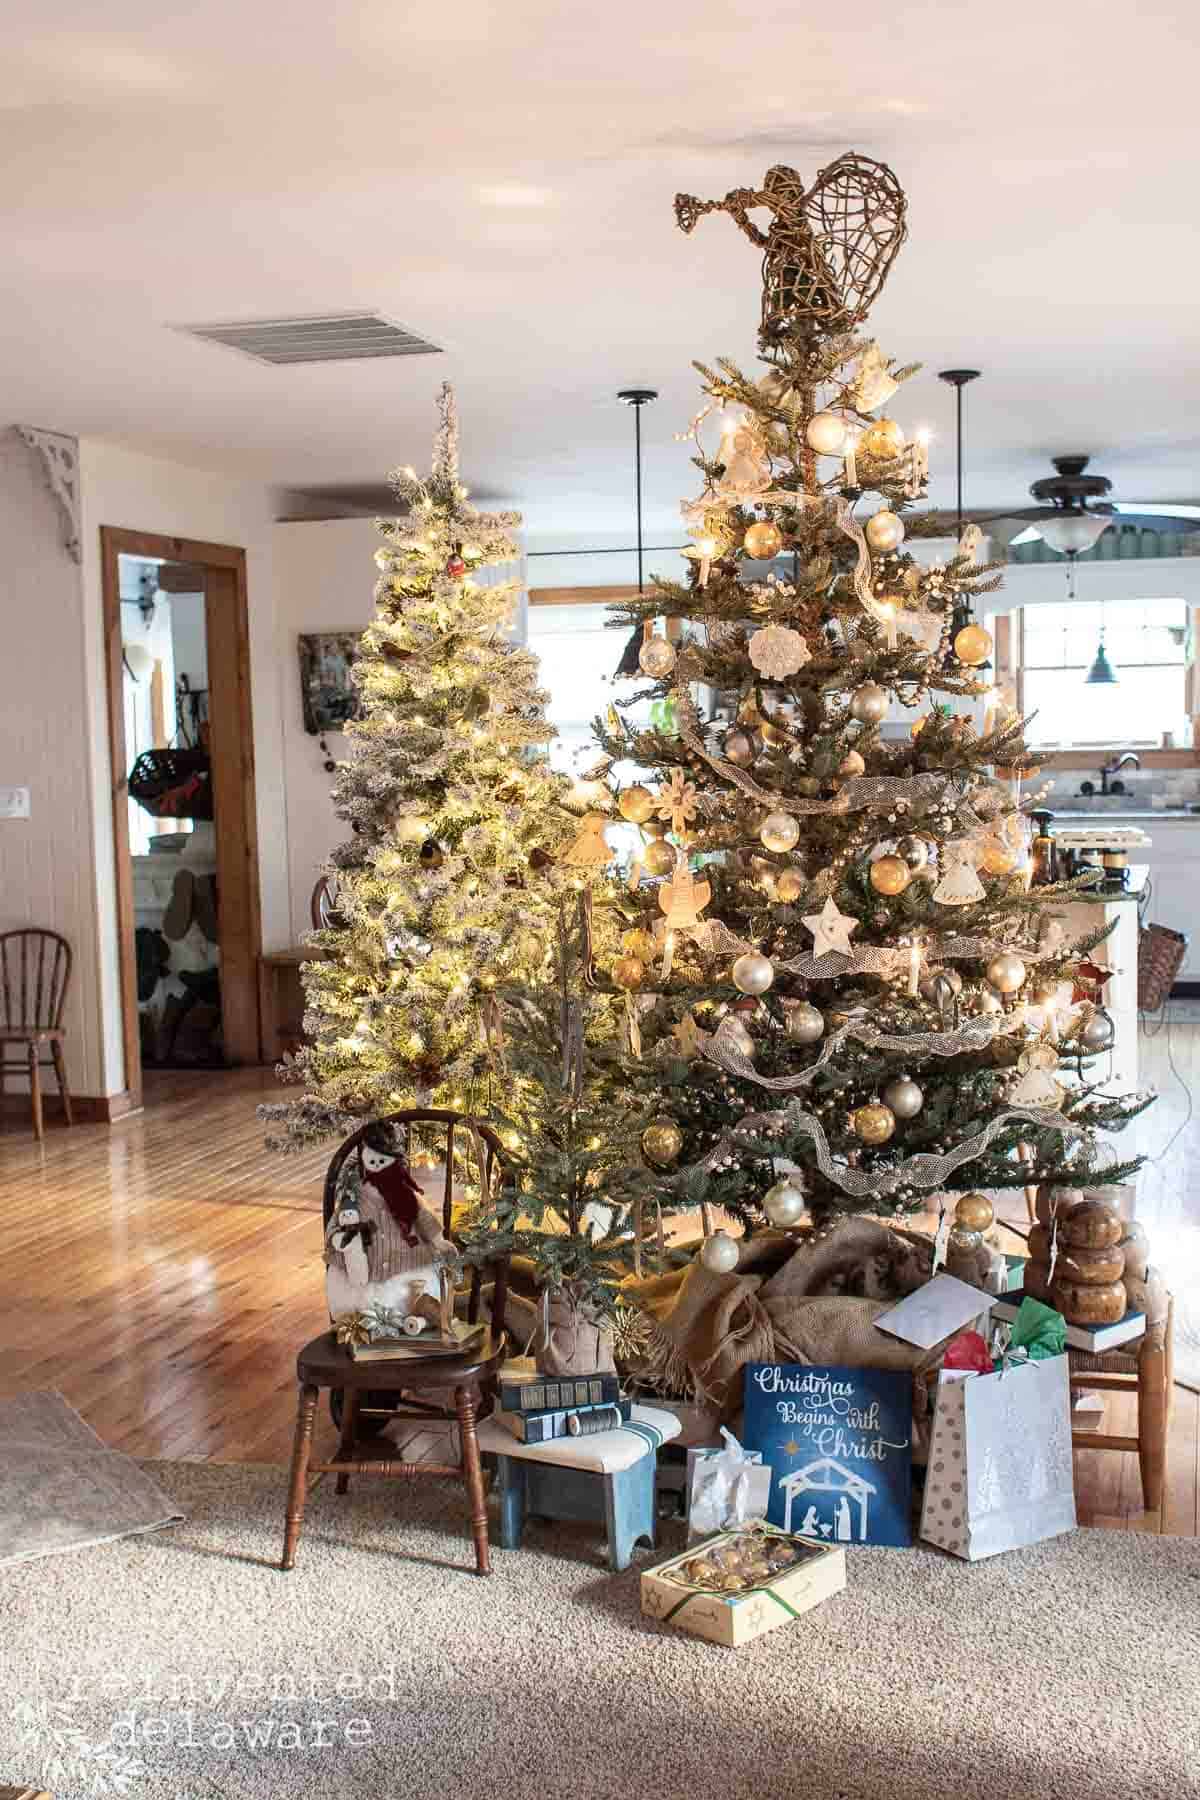 Christmas trees decorated with vintage ornaments